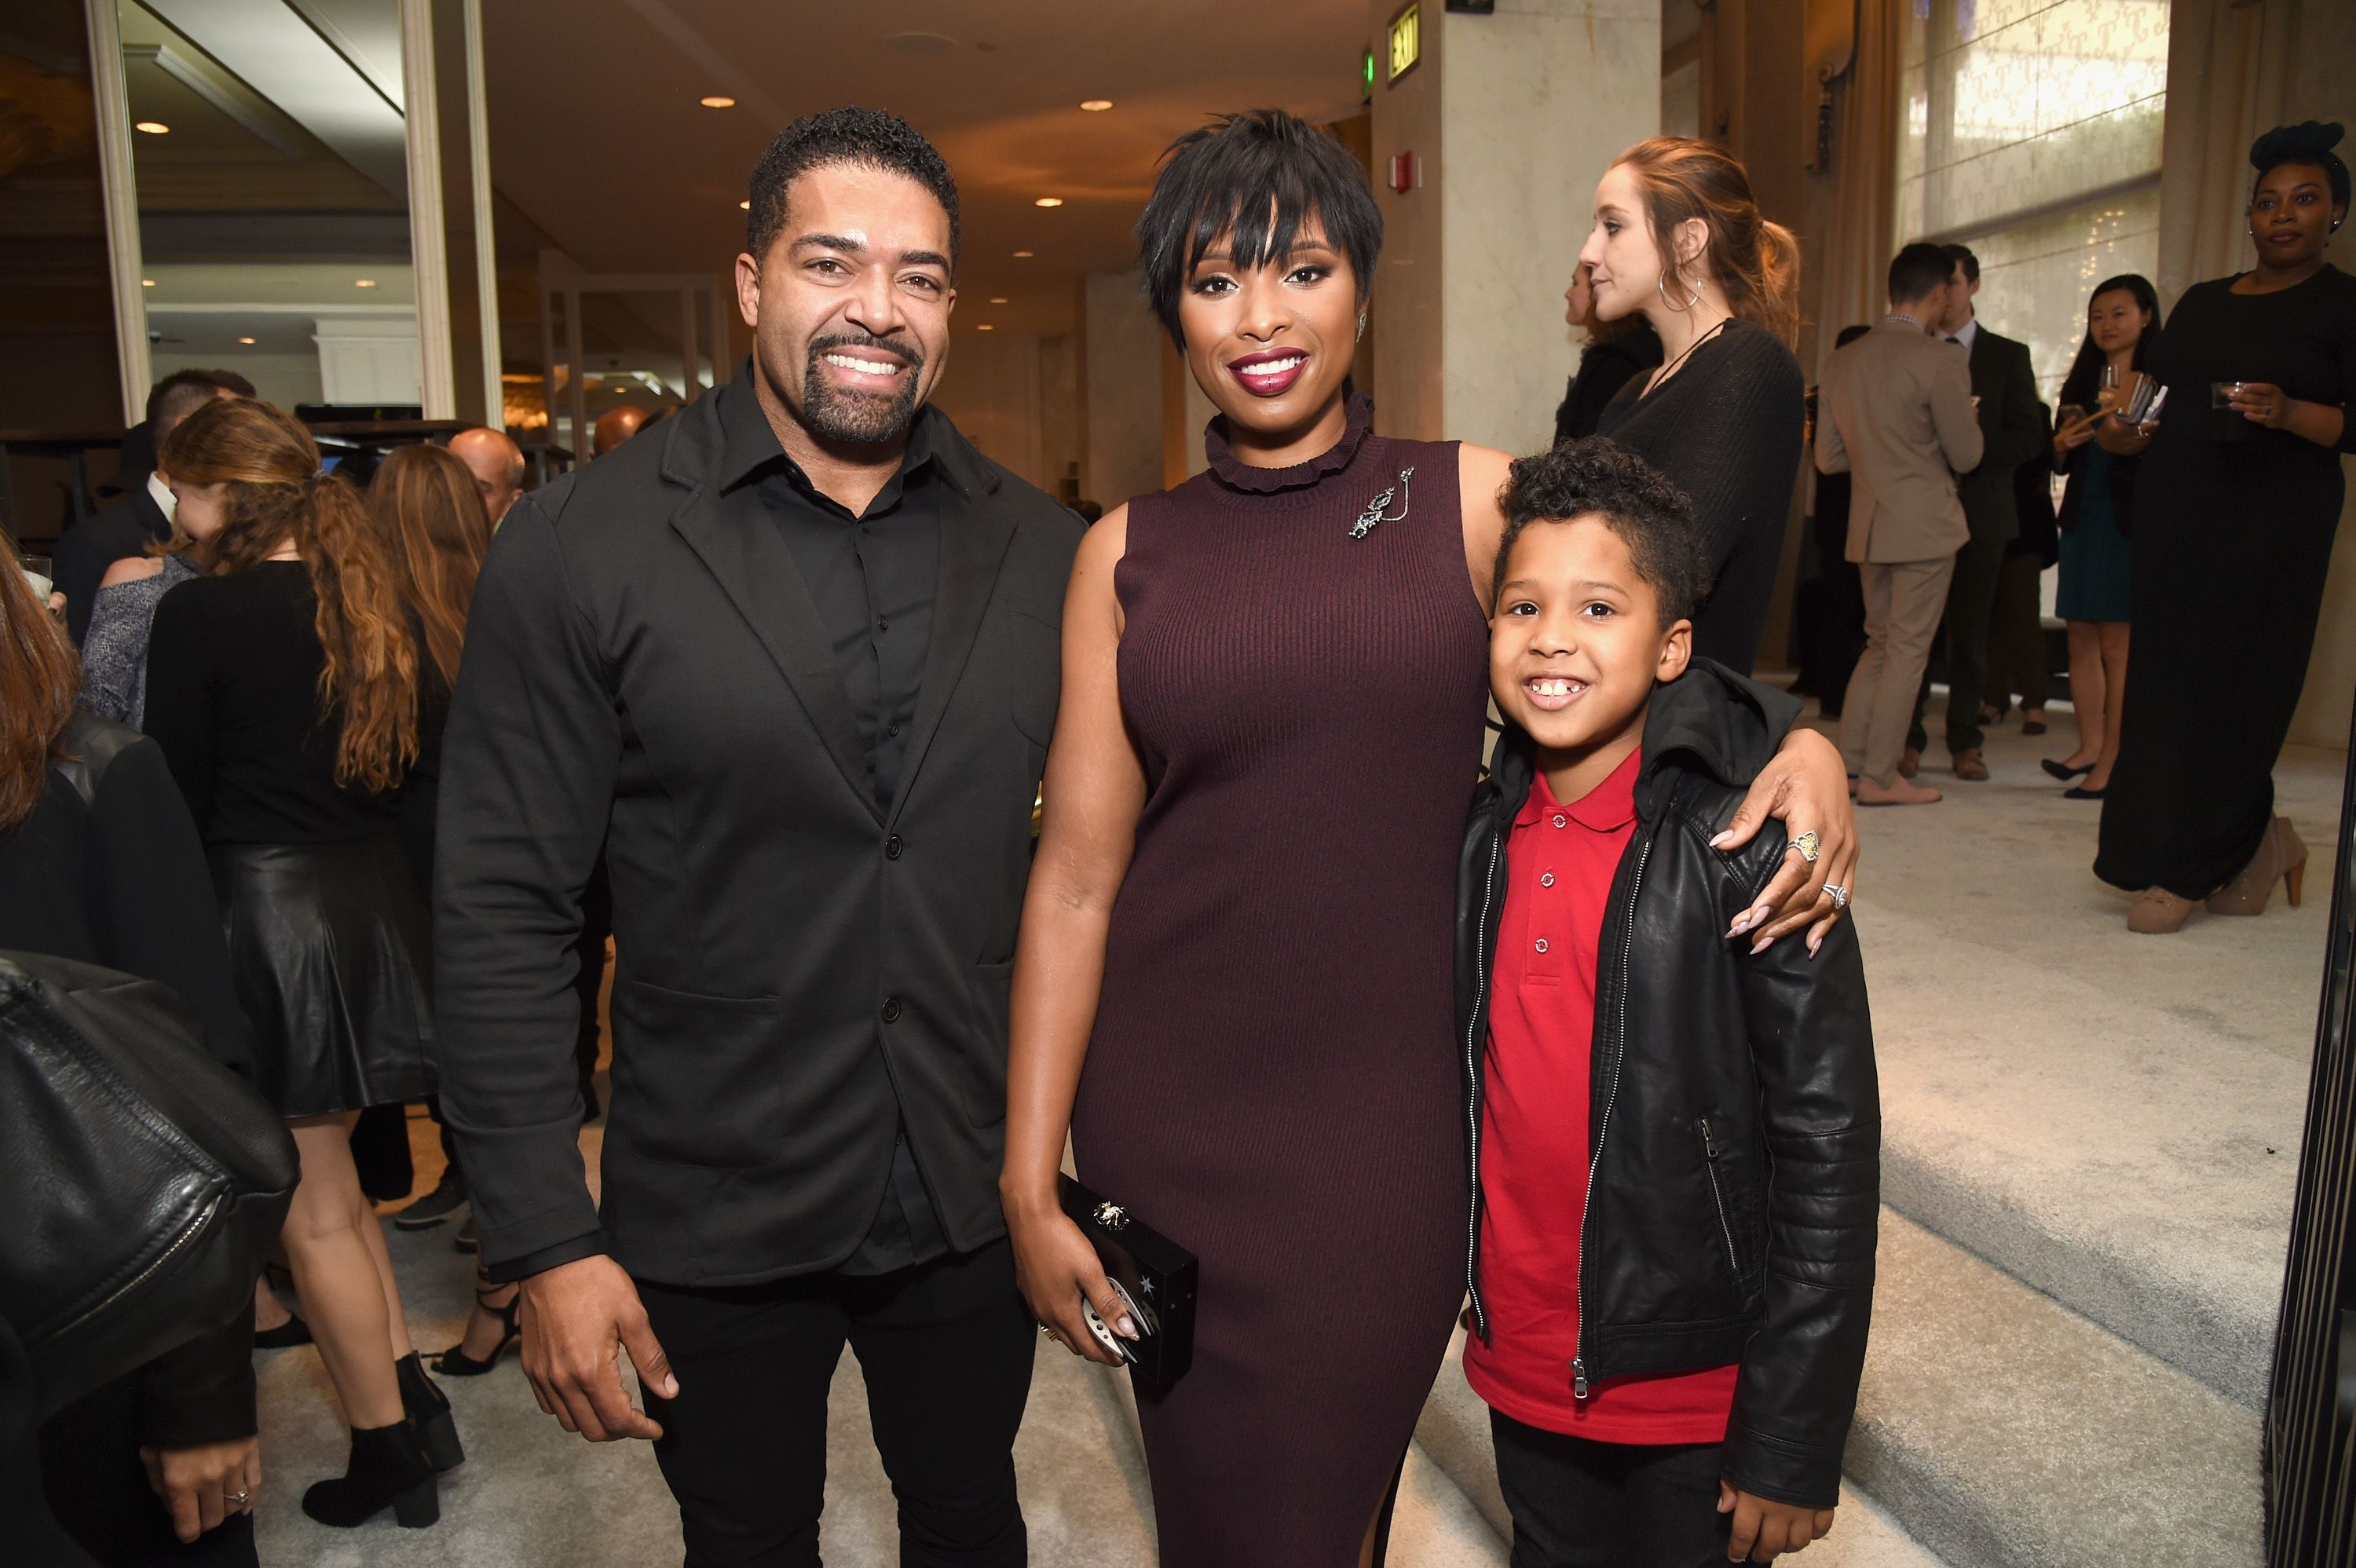 Wrestler David Otunga, honoree Jennifer Hudson and David Otunga Jr. at the 2016 March of Dimes Celebration of Babies at the Beverly Wilshire Four Seasons Hotel on December 9, 2016. | Source: Getty Images